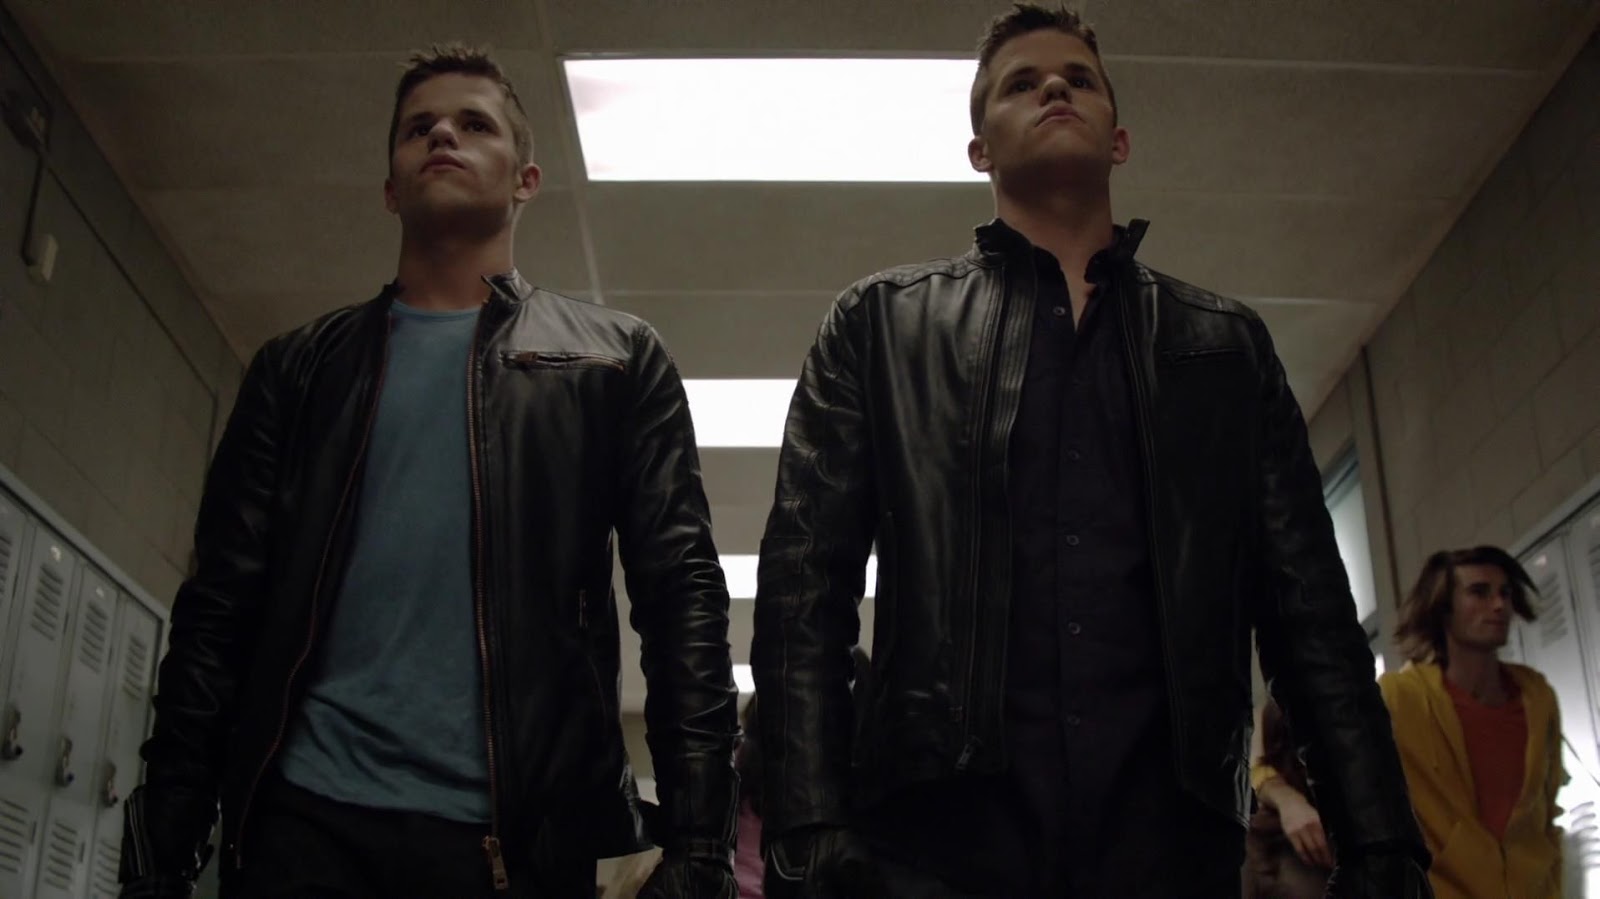 alpha+twins+in+leather.jpg